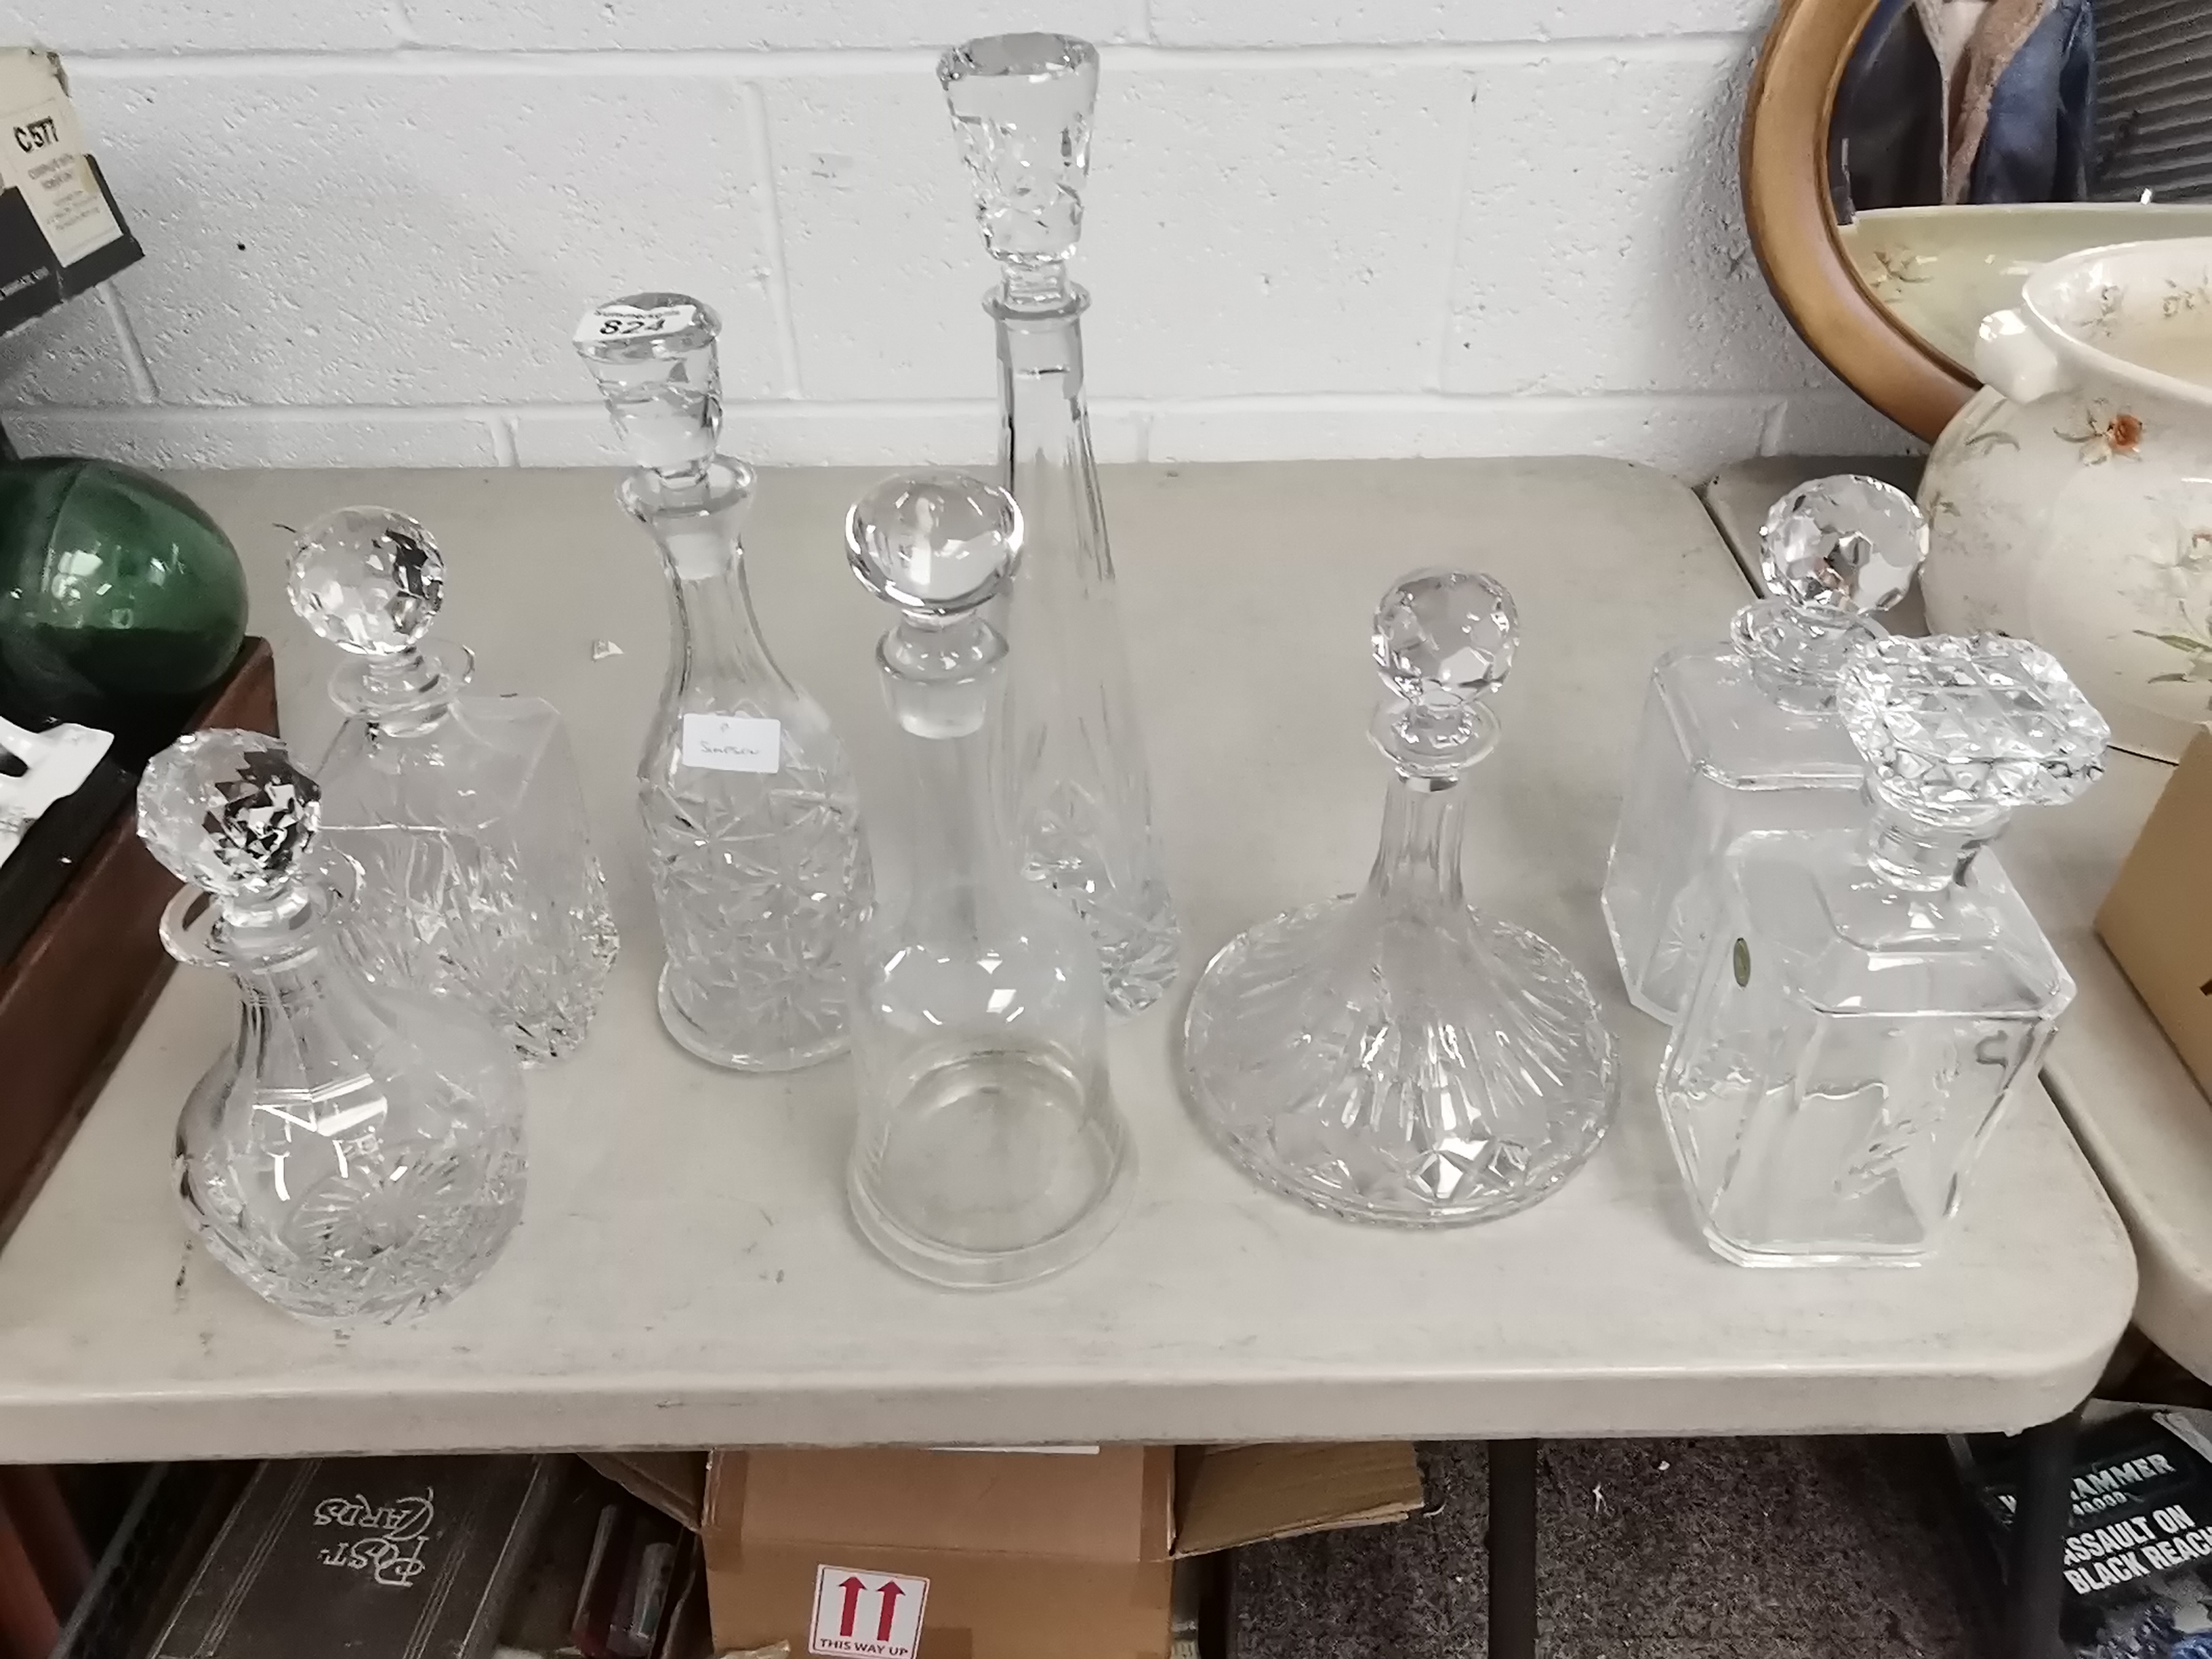 x8 Crystal decanters including ships decanters